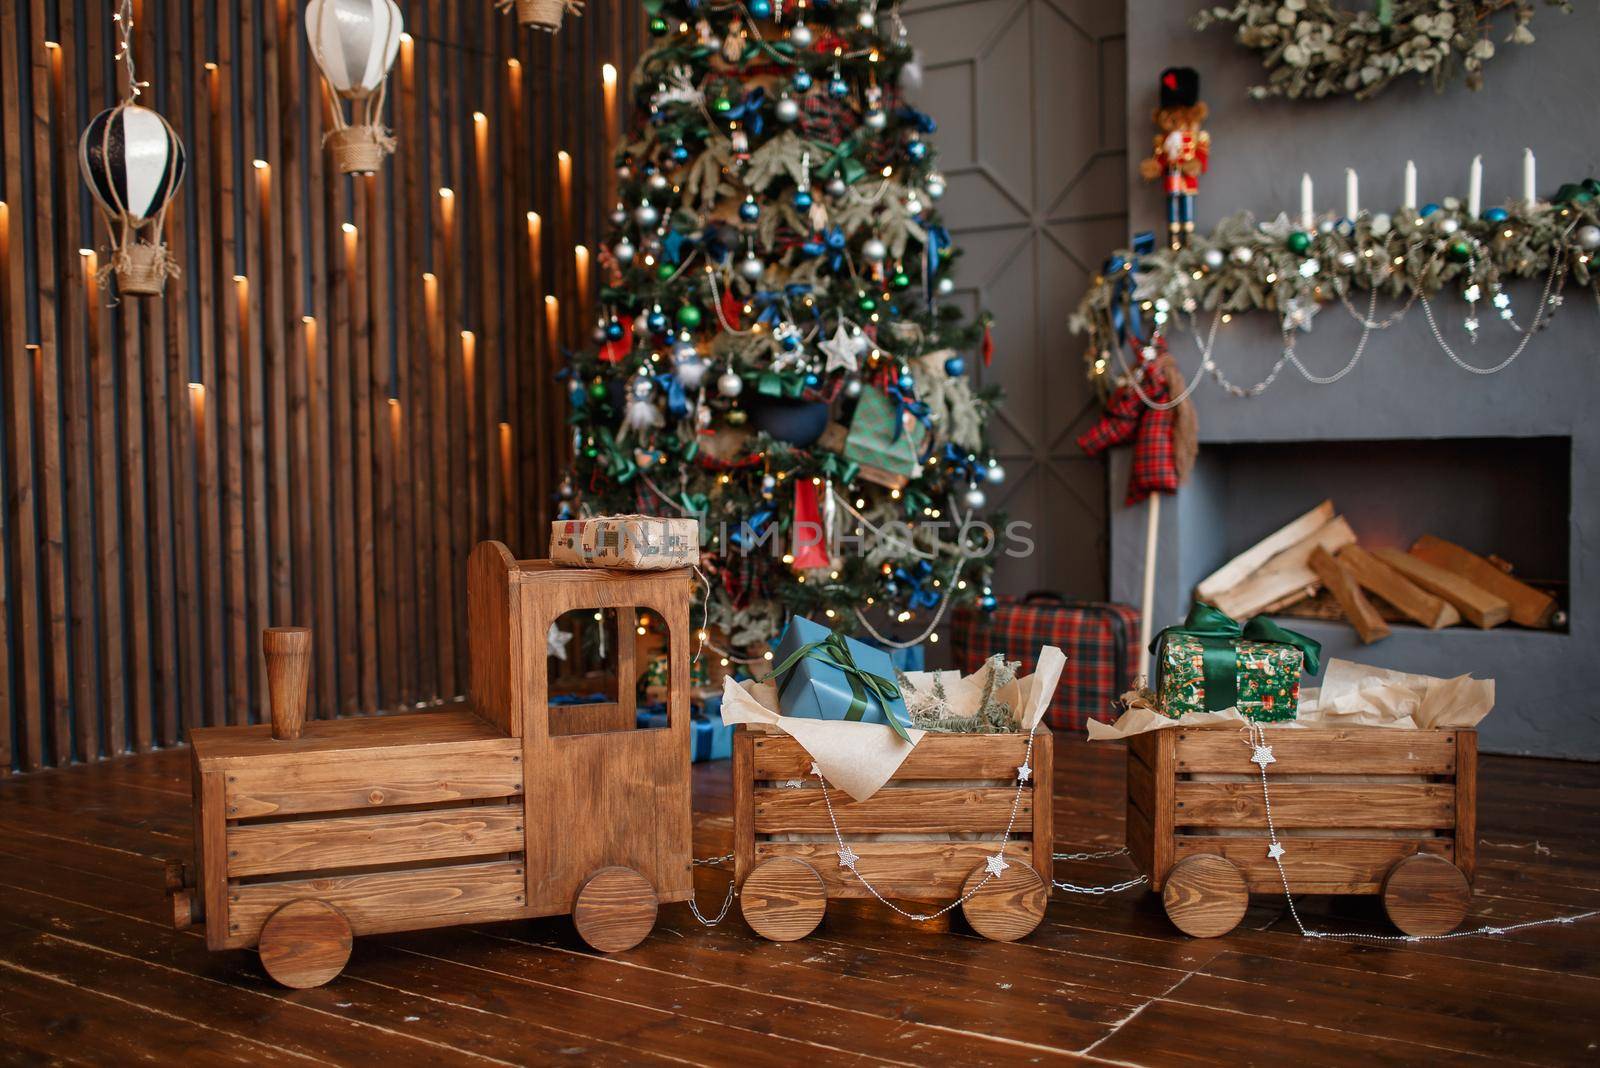 A full-length wooden steam train in a Christmas photo studio. by deandy